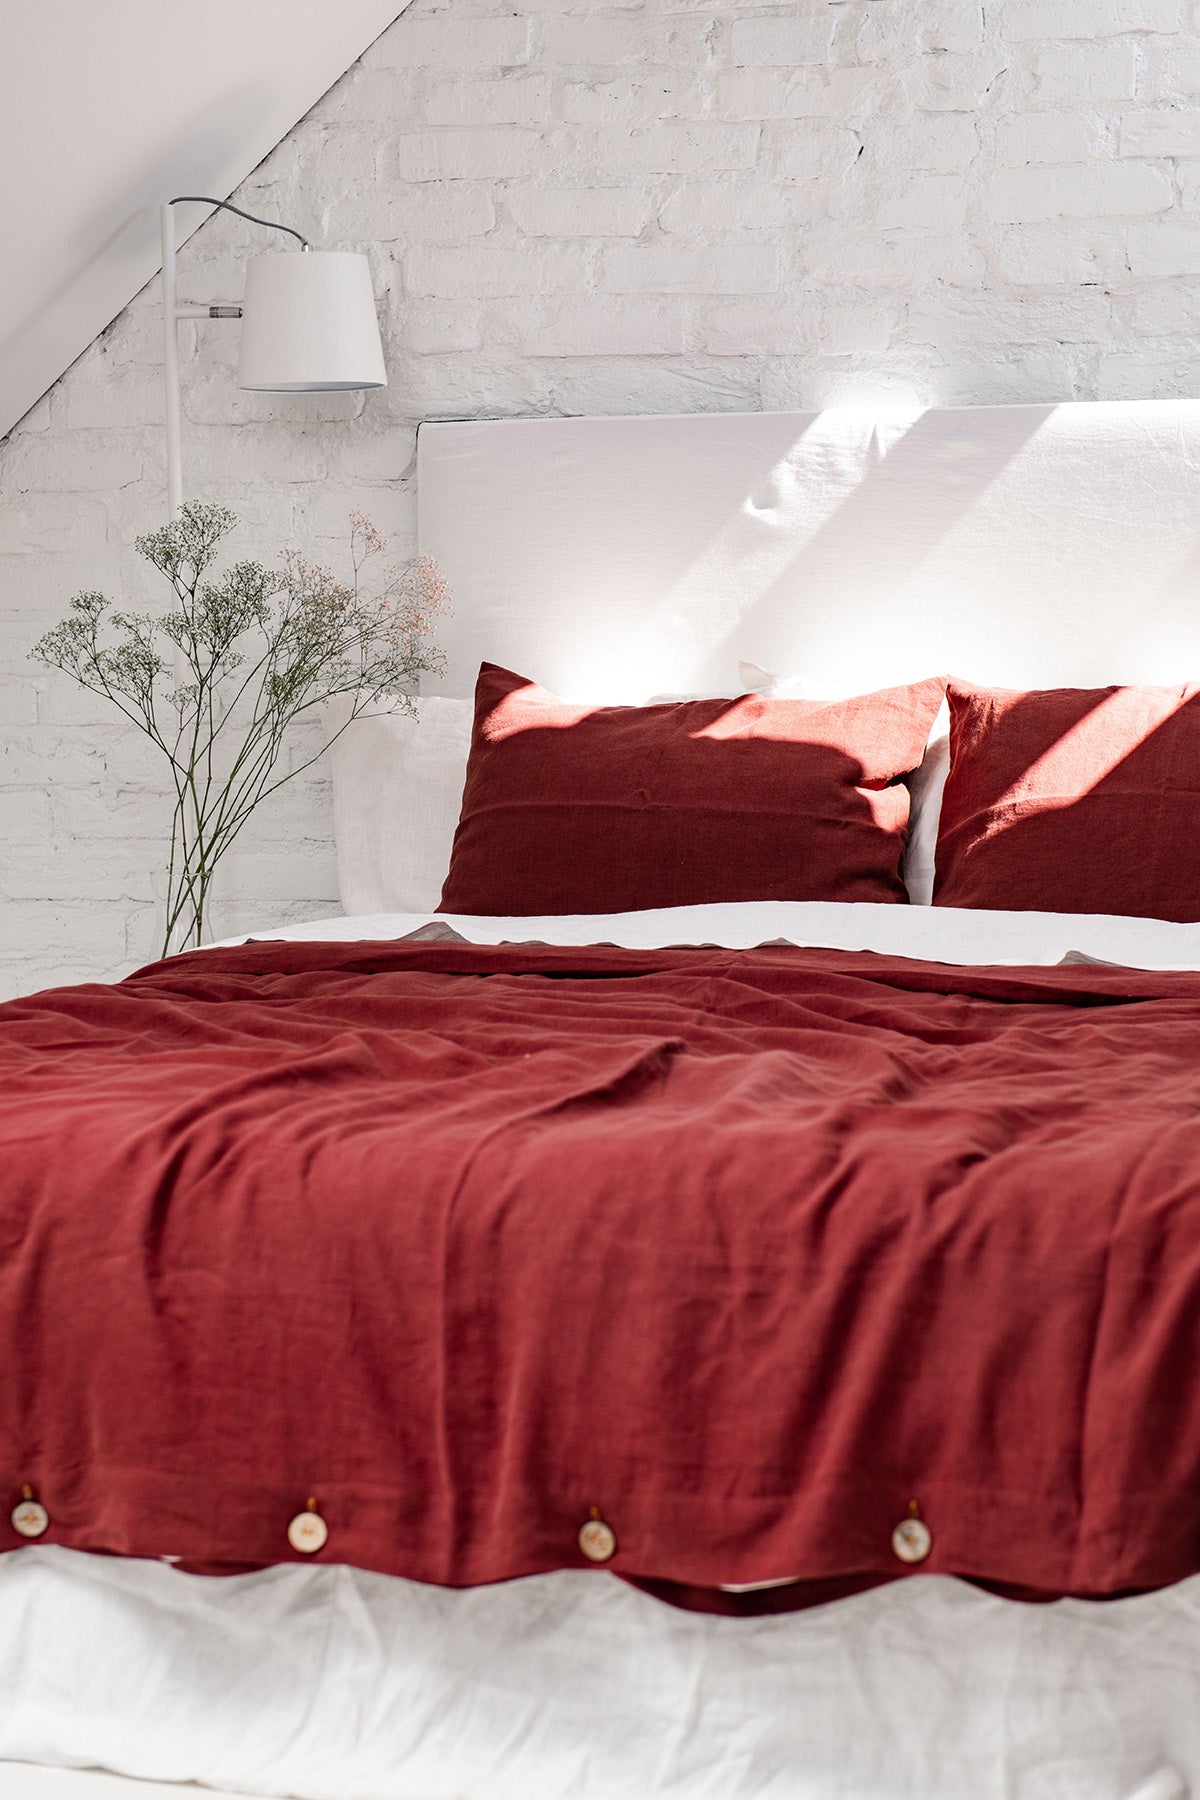 Bed With Terracotta Linen Duvet Cover By AmourlInen